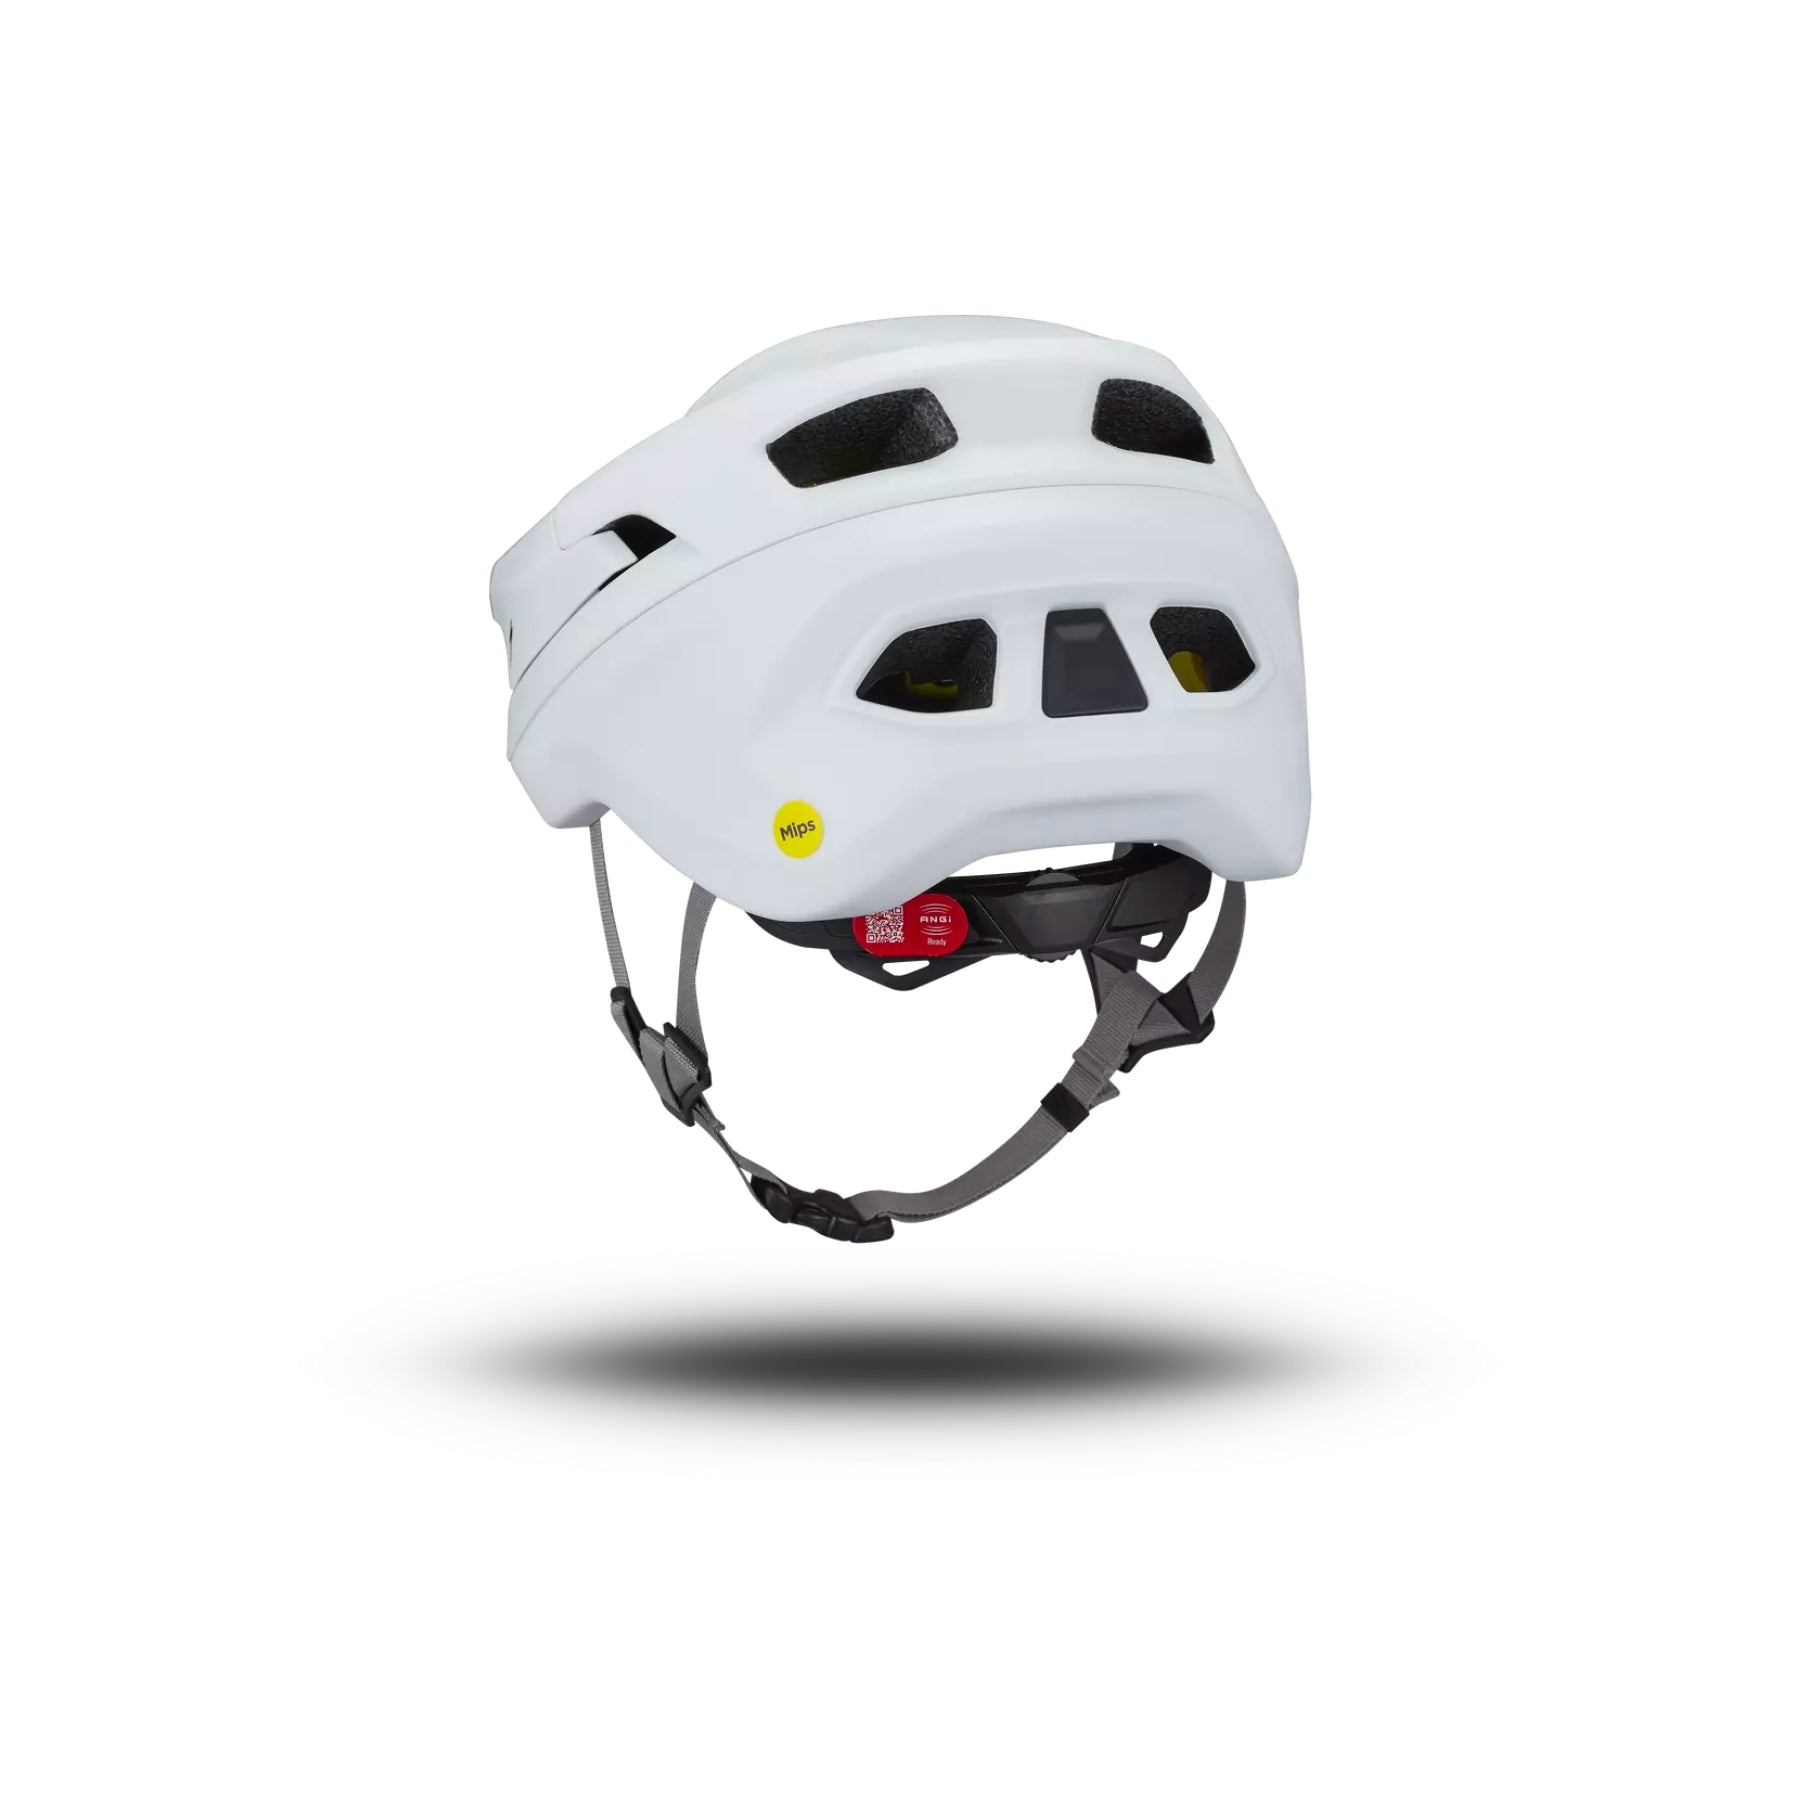 Helmet Specialized Camber White